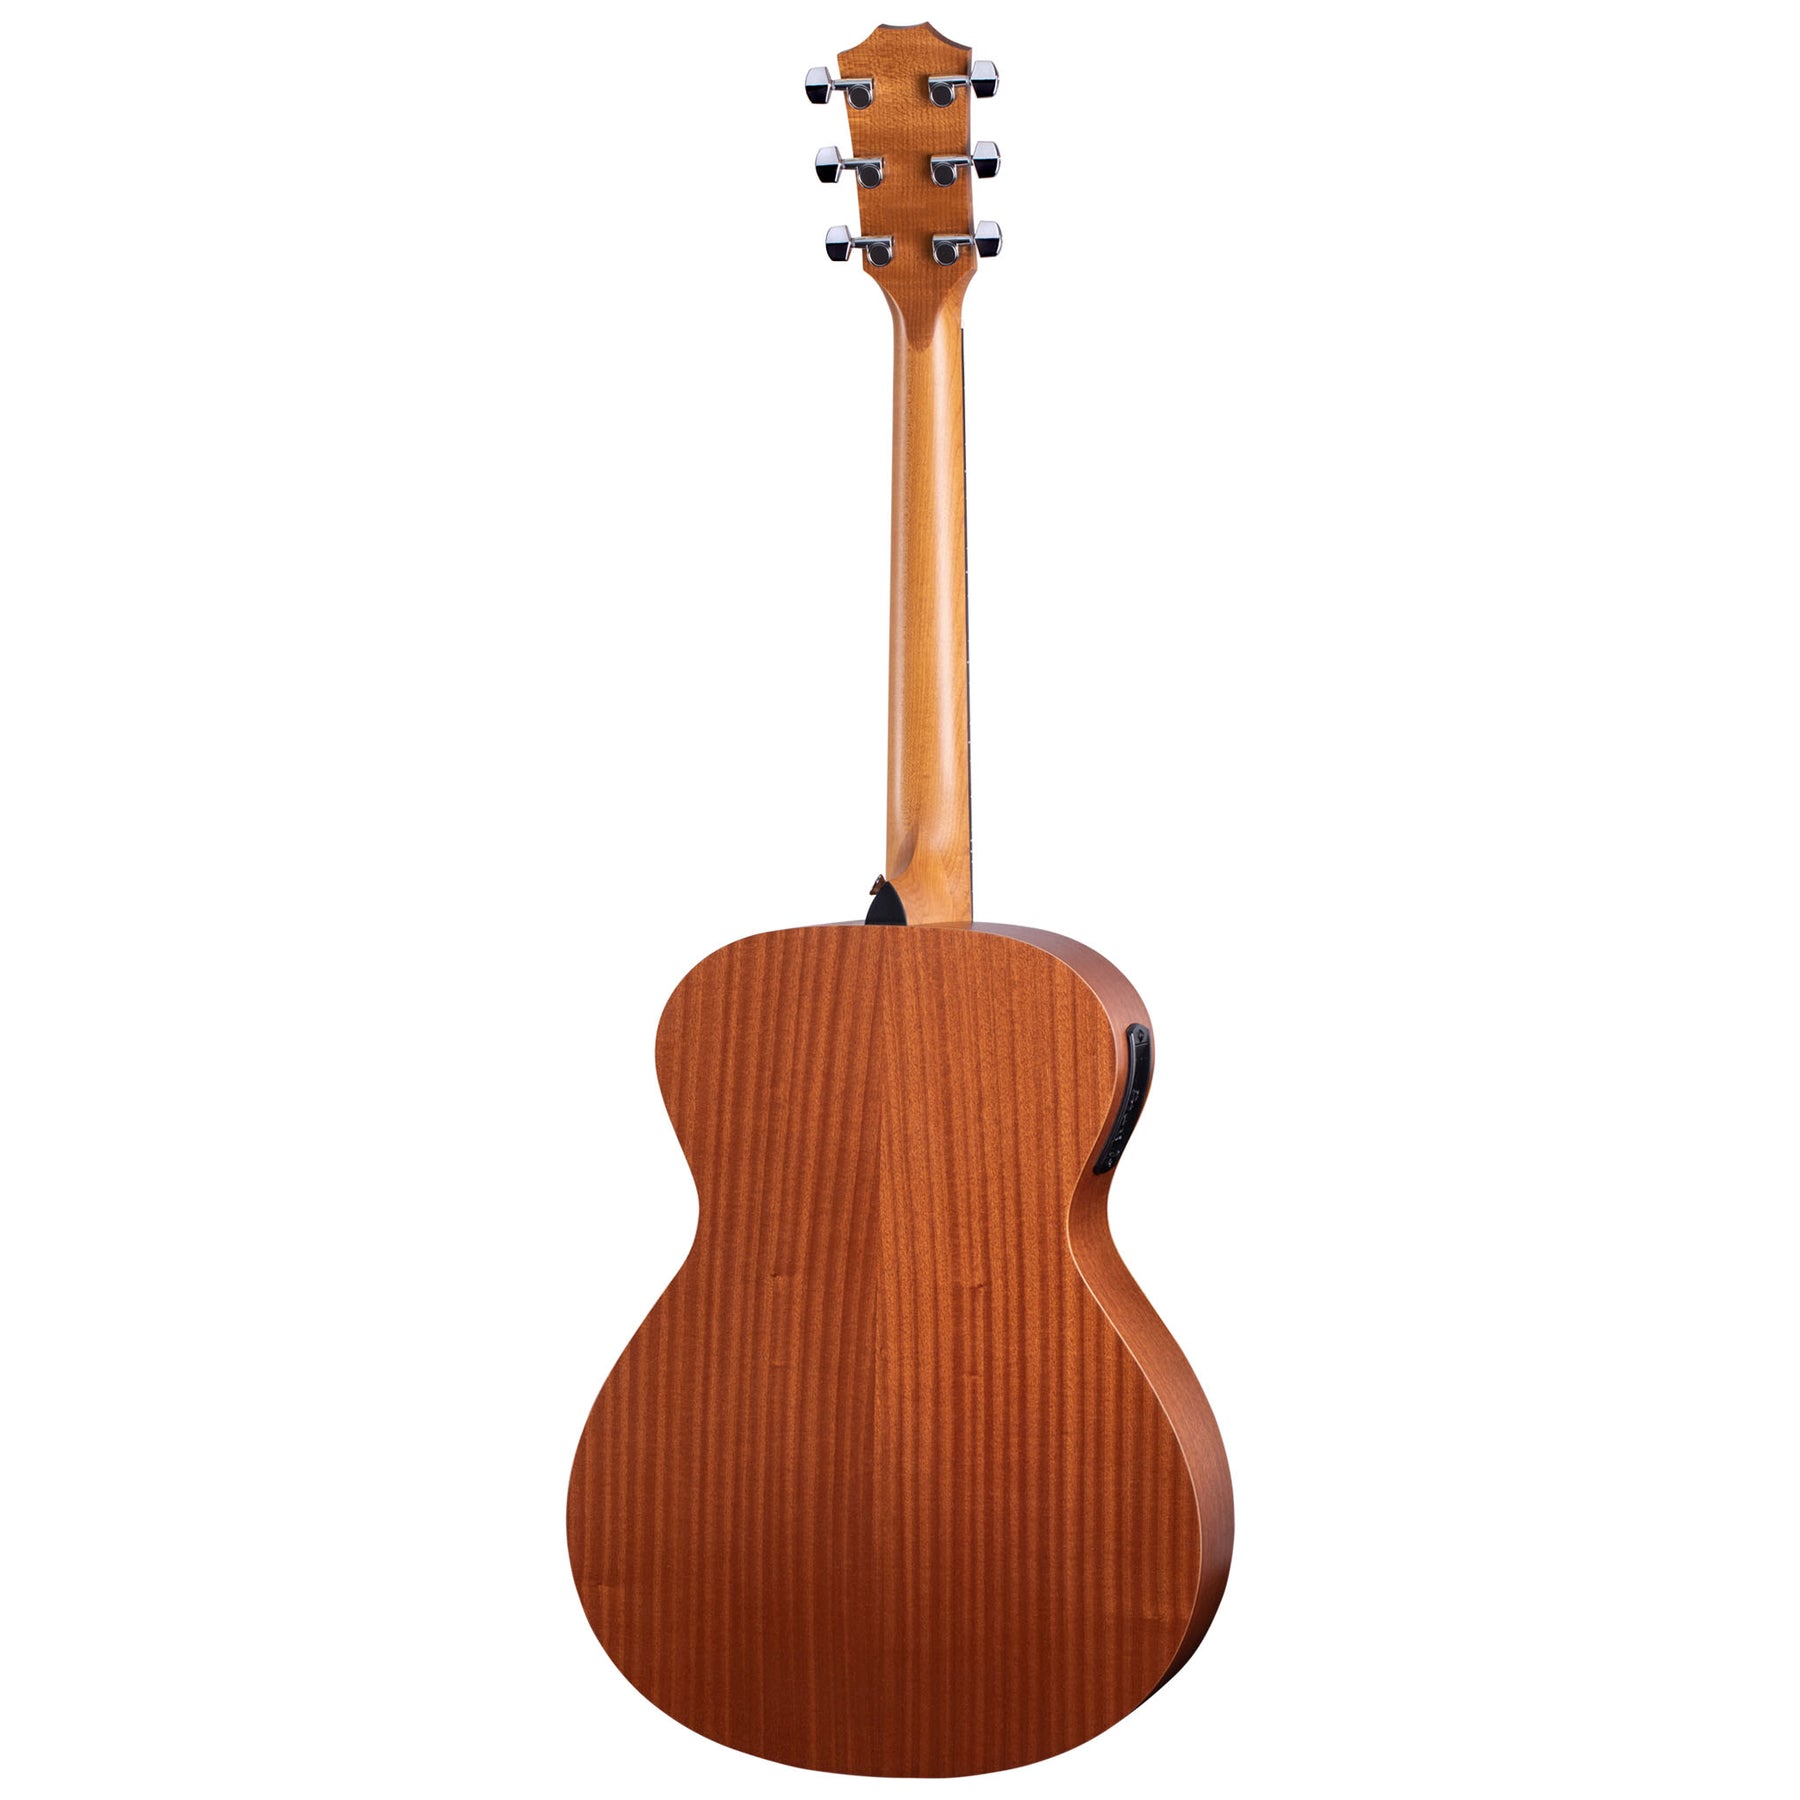 Academy　Acoustic-Electric　Layered　Taylor　Sapele　12e　Guitar